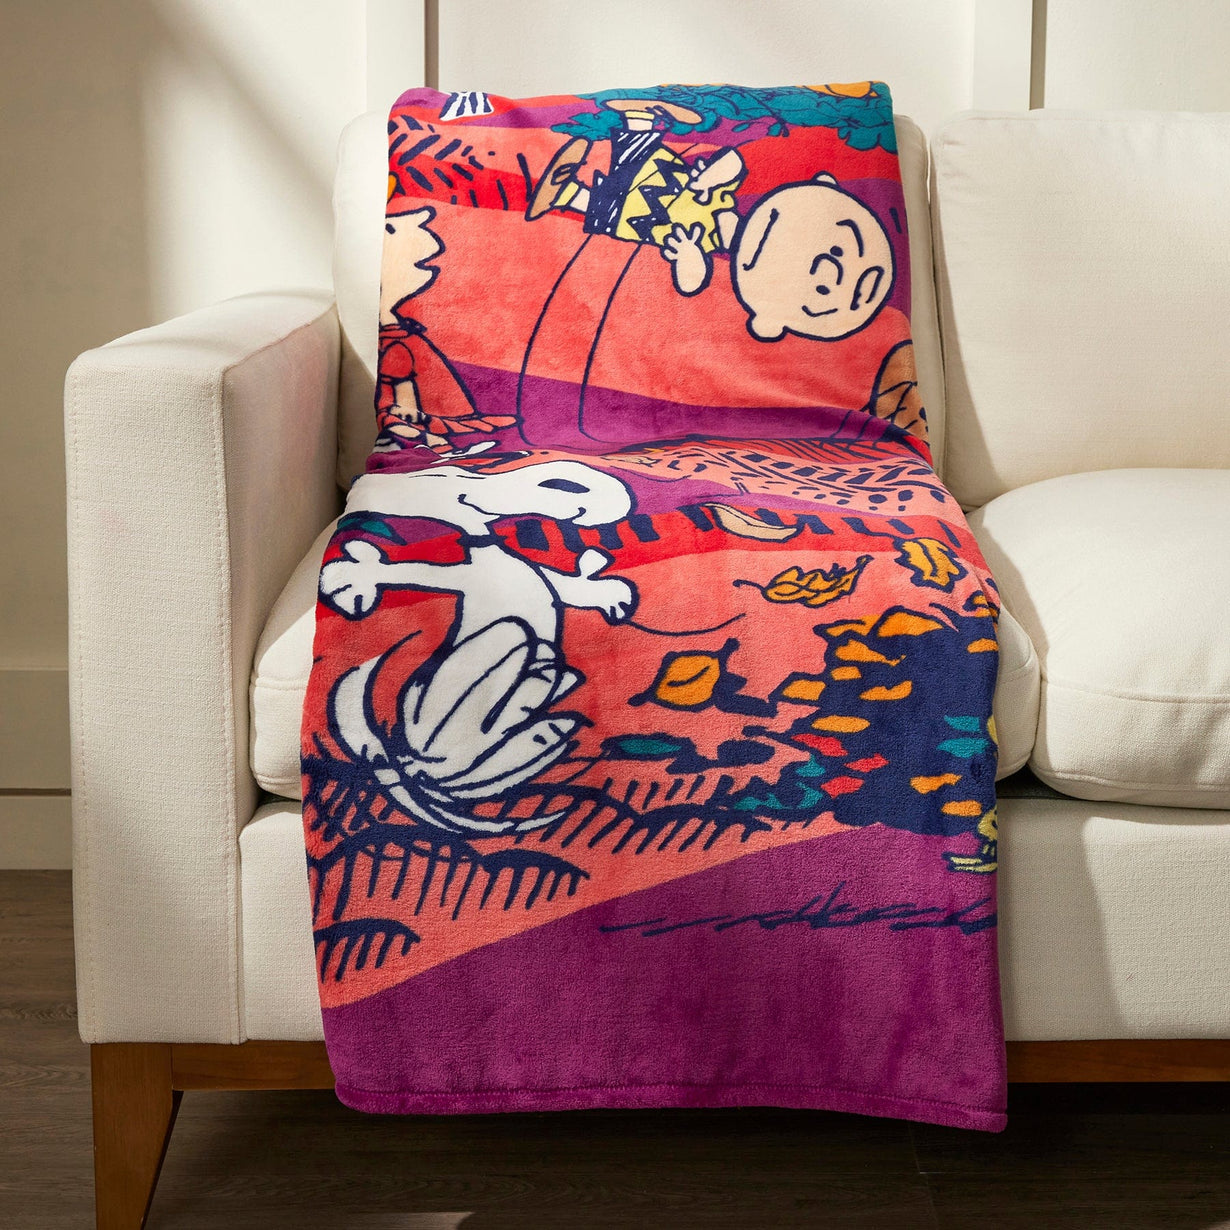 Peanuts fleece throw blanket laying on couch